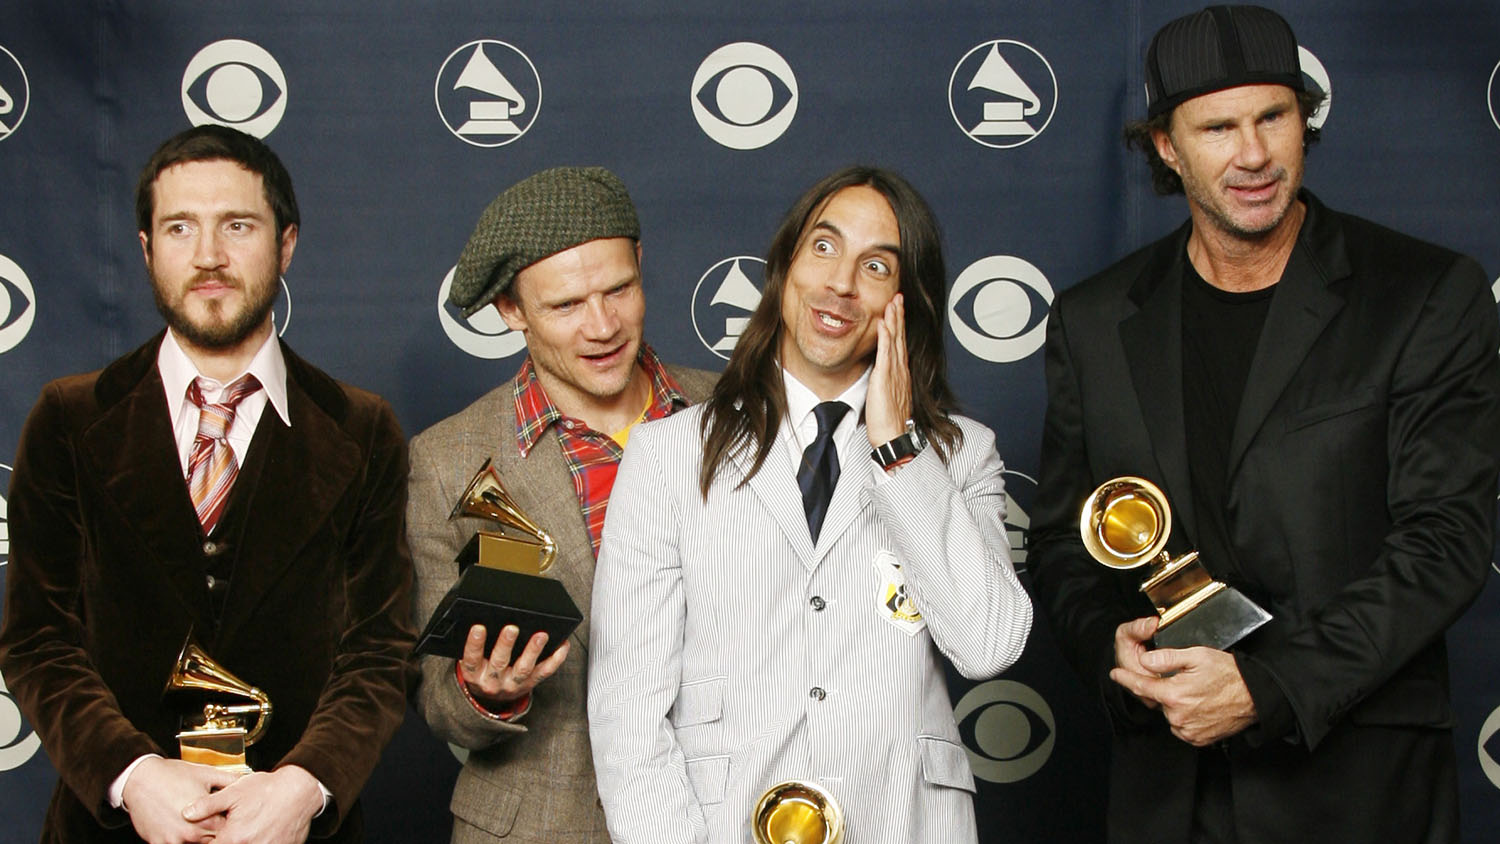 Uheldig Diskurs Tochi træ Red Hot Chili Peppers: Everything you need to know about the band